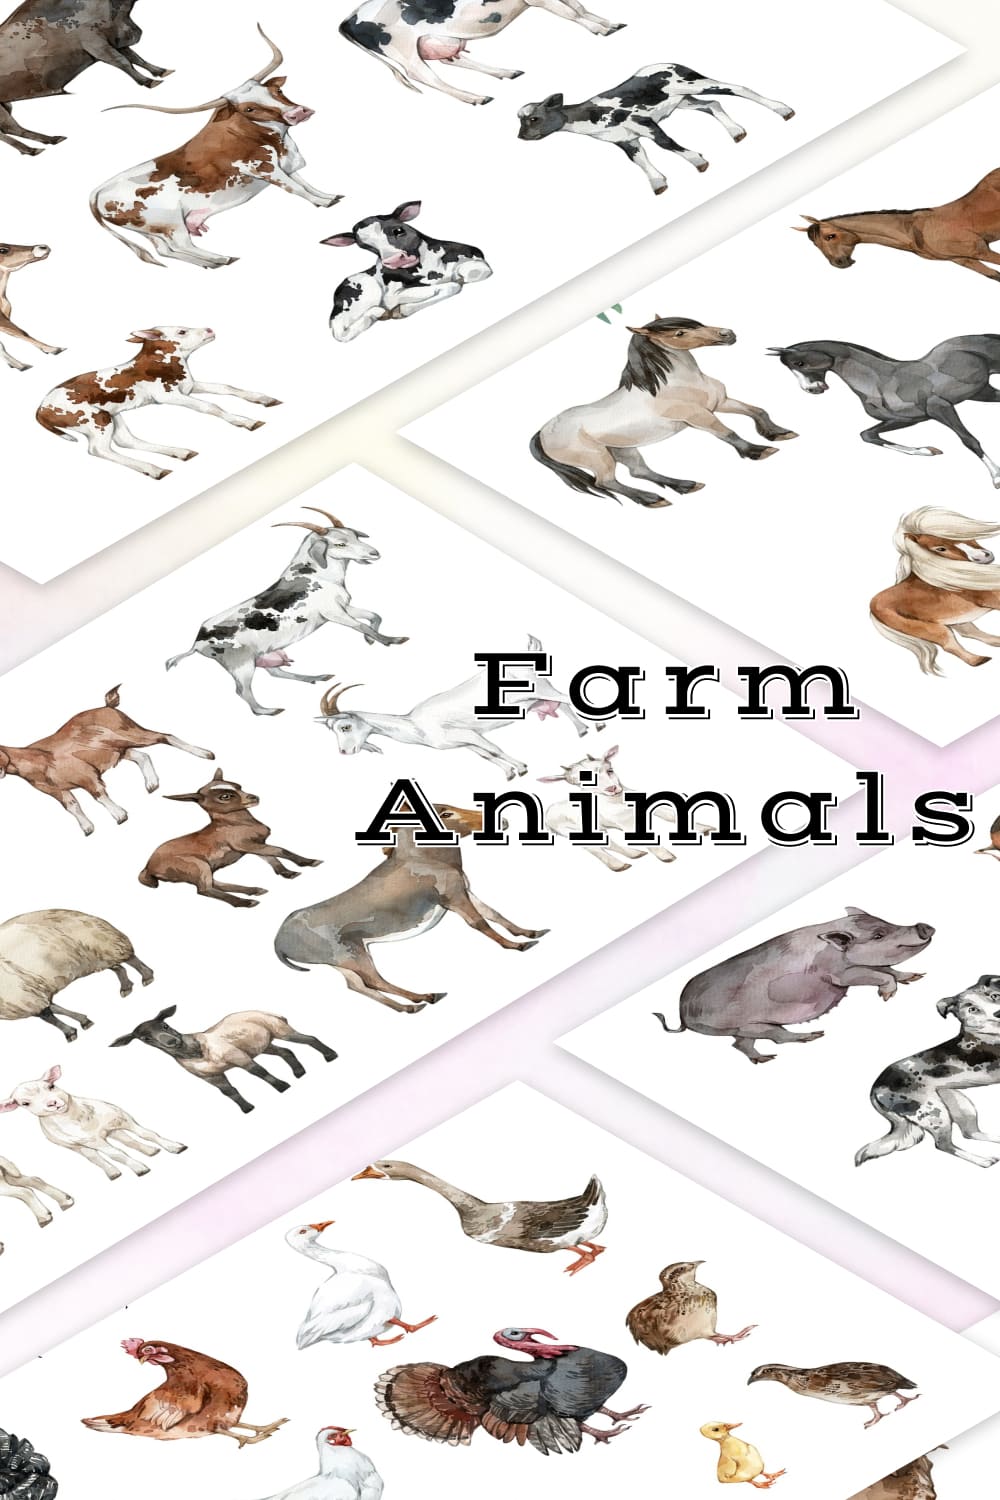 Watercolor encyclopedia of farm animals - Pinterest Image Preview.